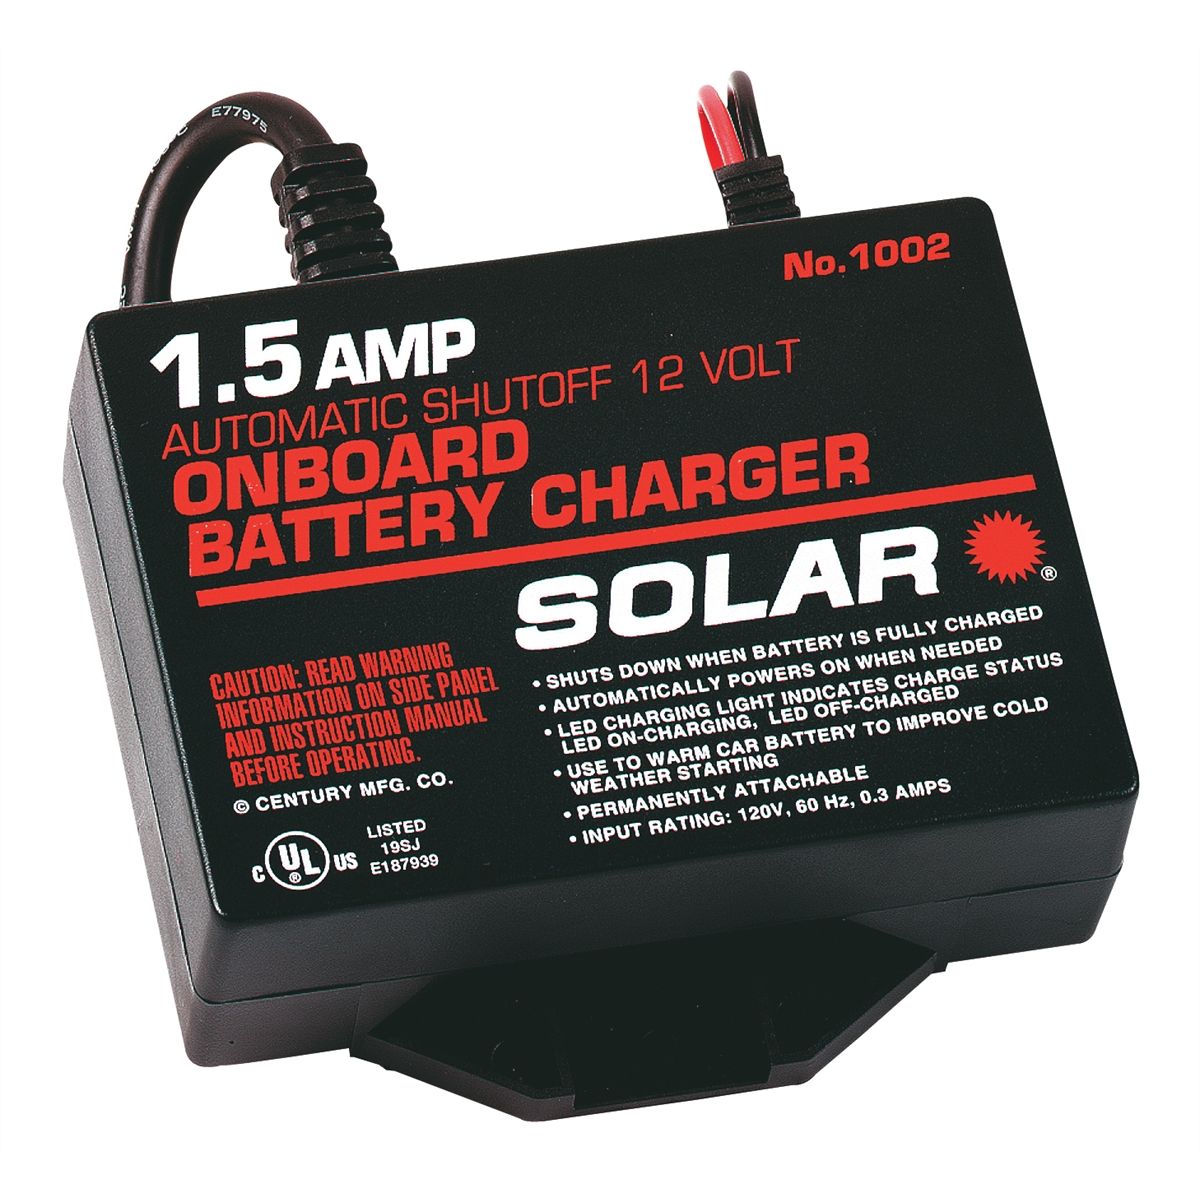 BLACK + DECKER Vehicle Battery Maintainer and Trickle Charger